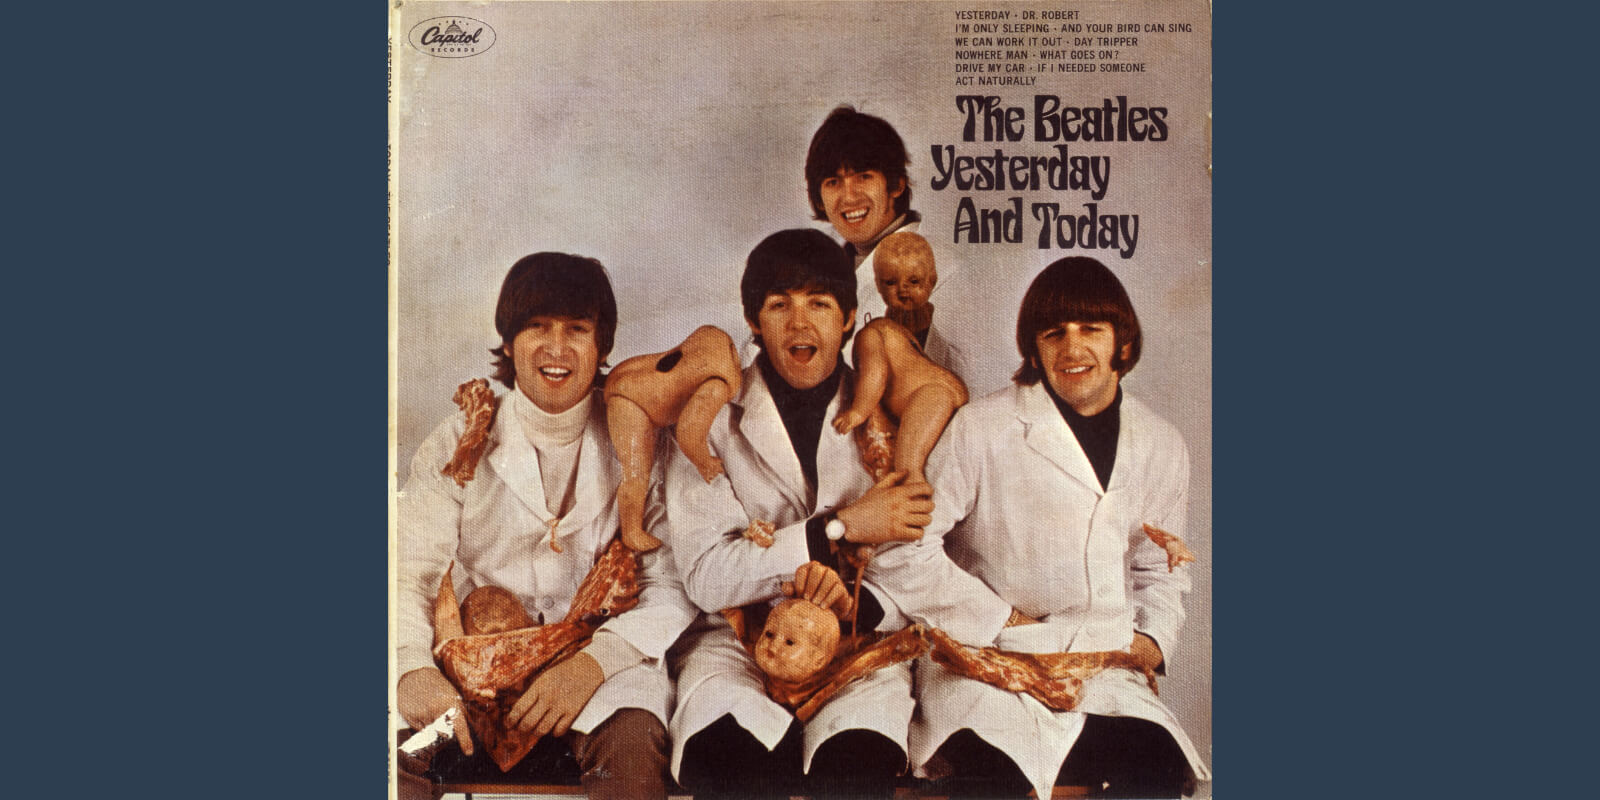 The "butcher cover" of The Beatles album 'Yesterday and Today' sold for $125K at an auction on Feb. 20, 2016.